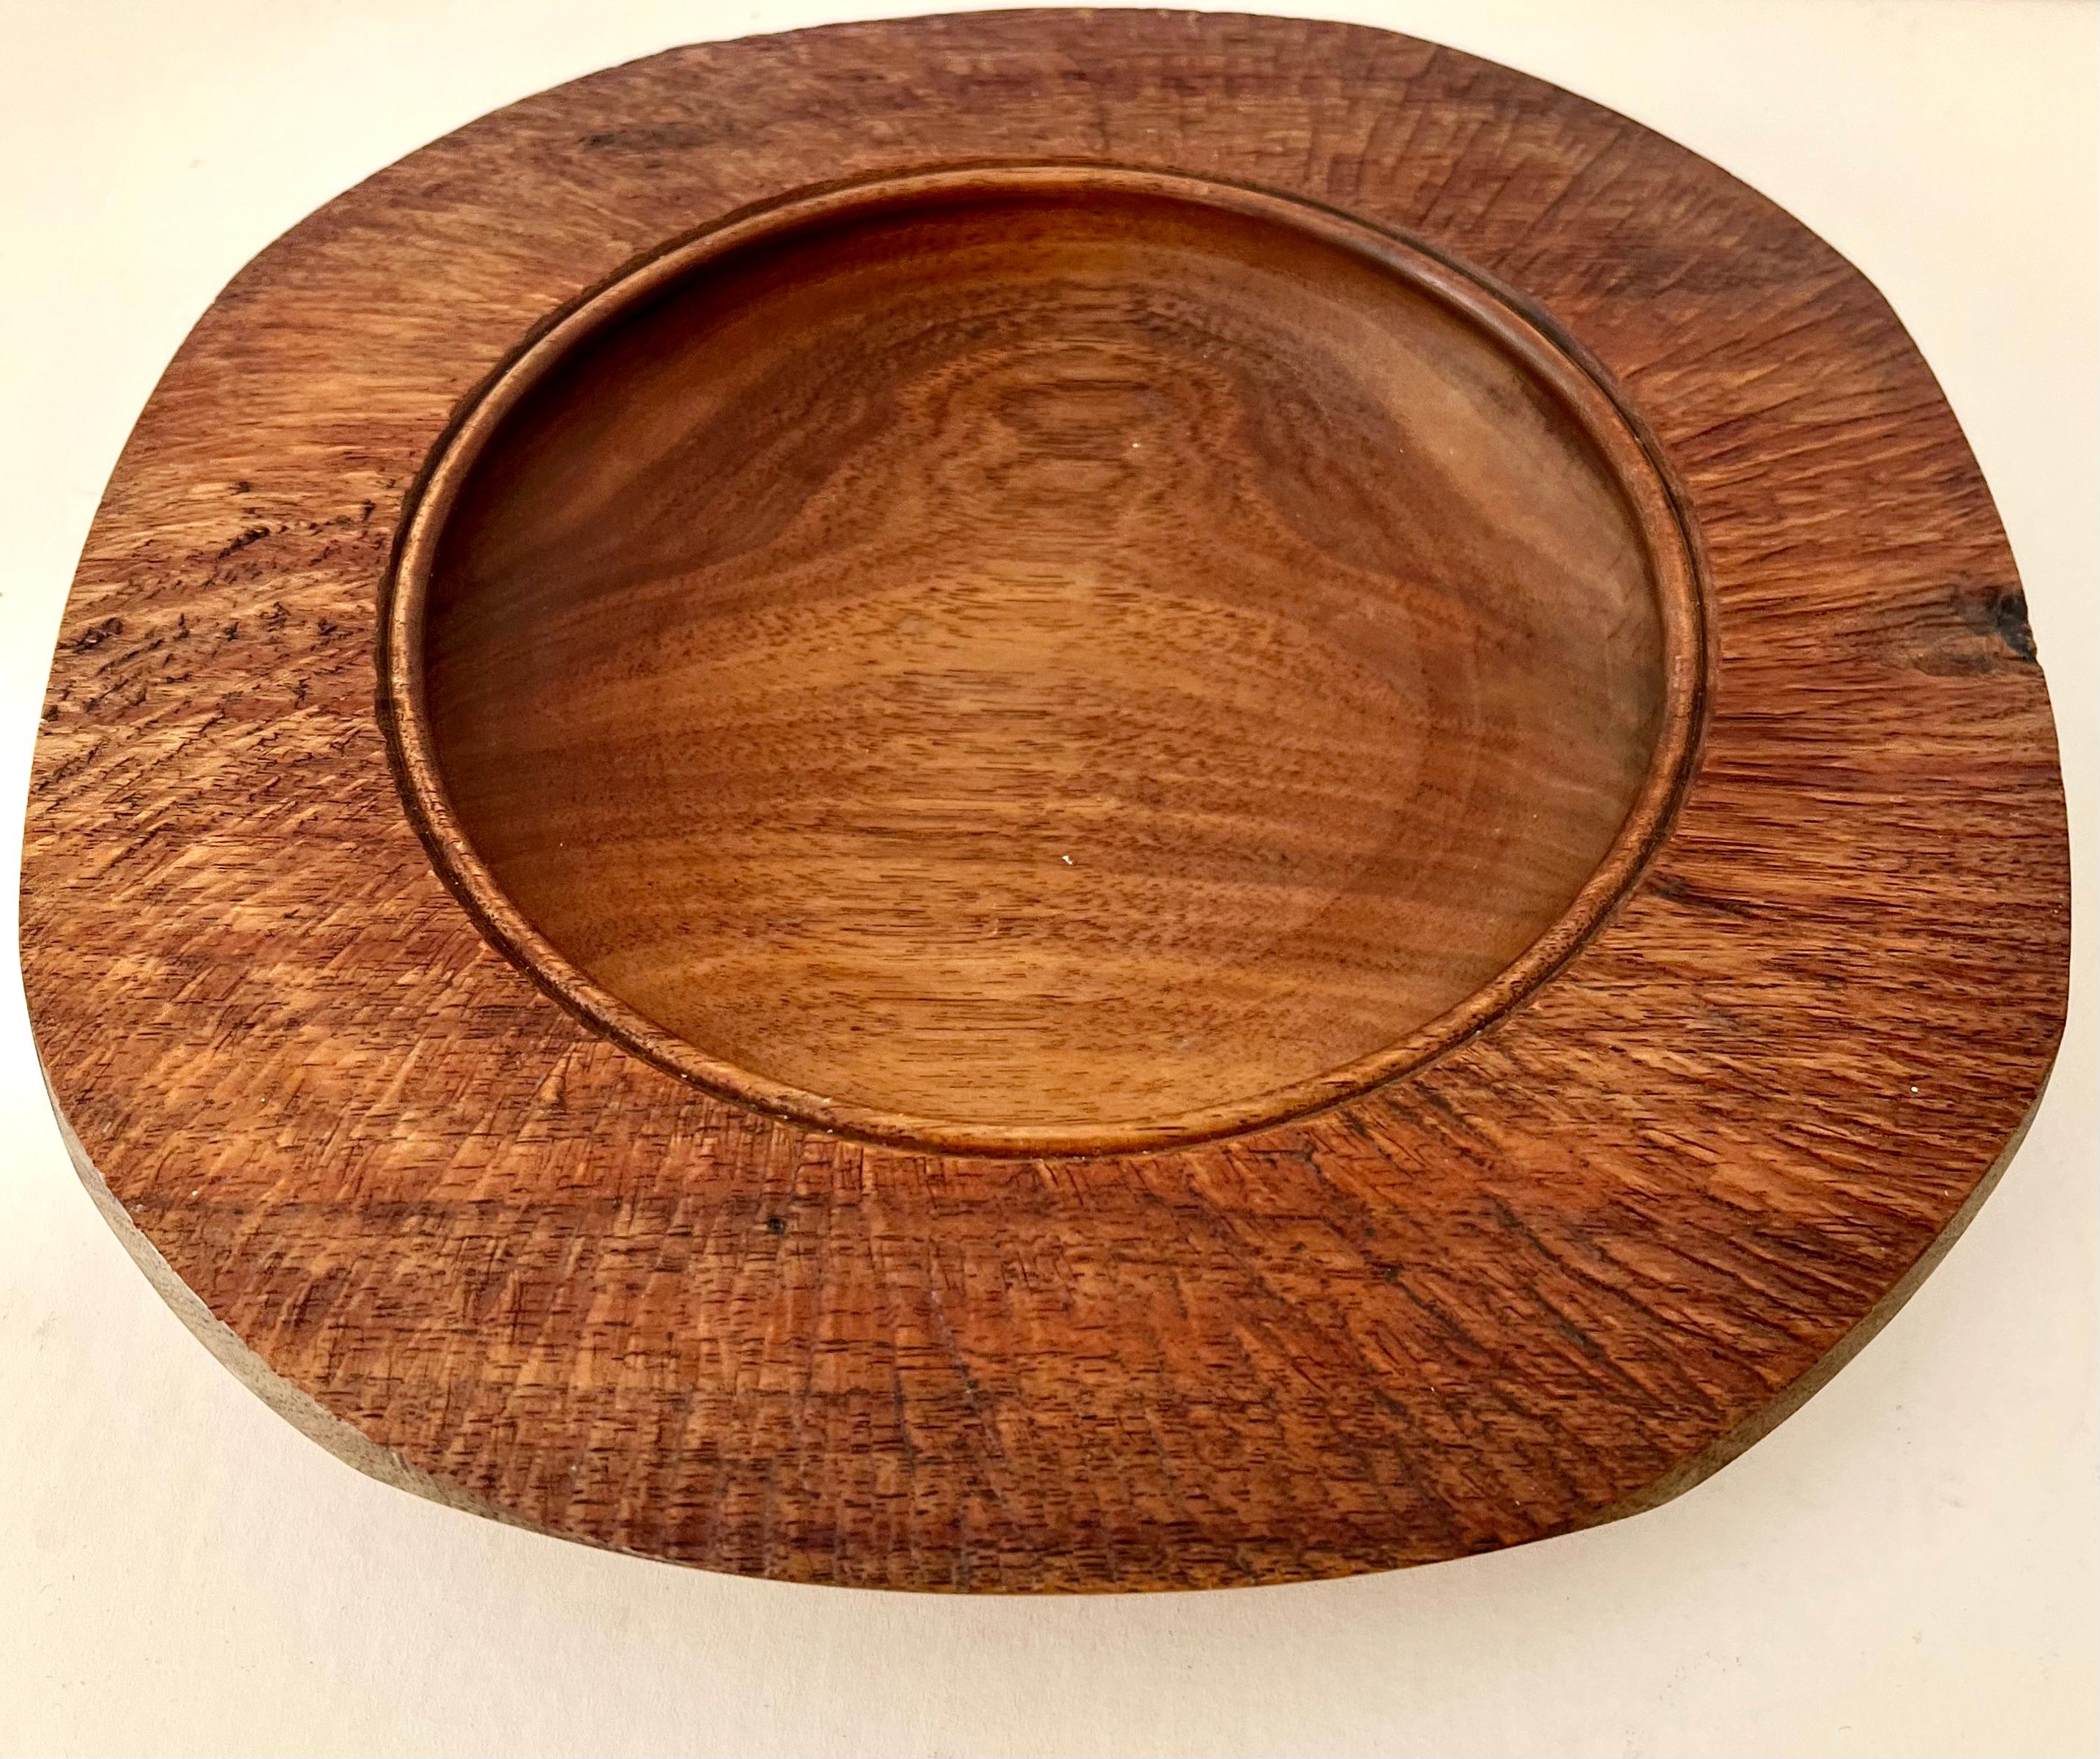 Signed Handmade New Zealand Blackwood Bowl with Rough Hewn Edges For Sale 3